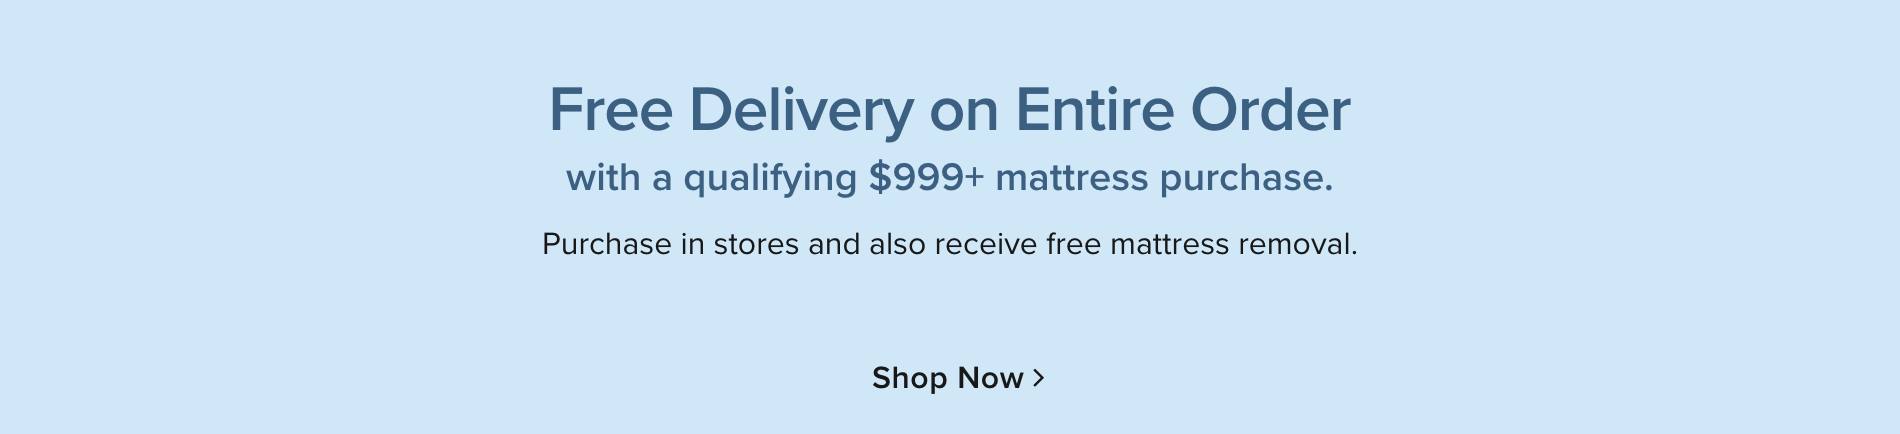 Free Deliver on Entire Order with mattress purchase - Shop Now